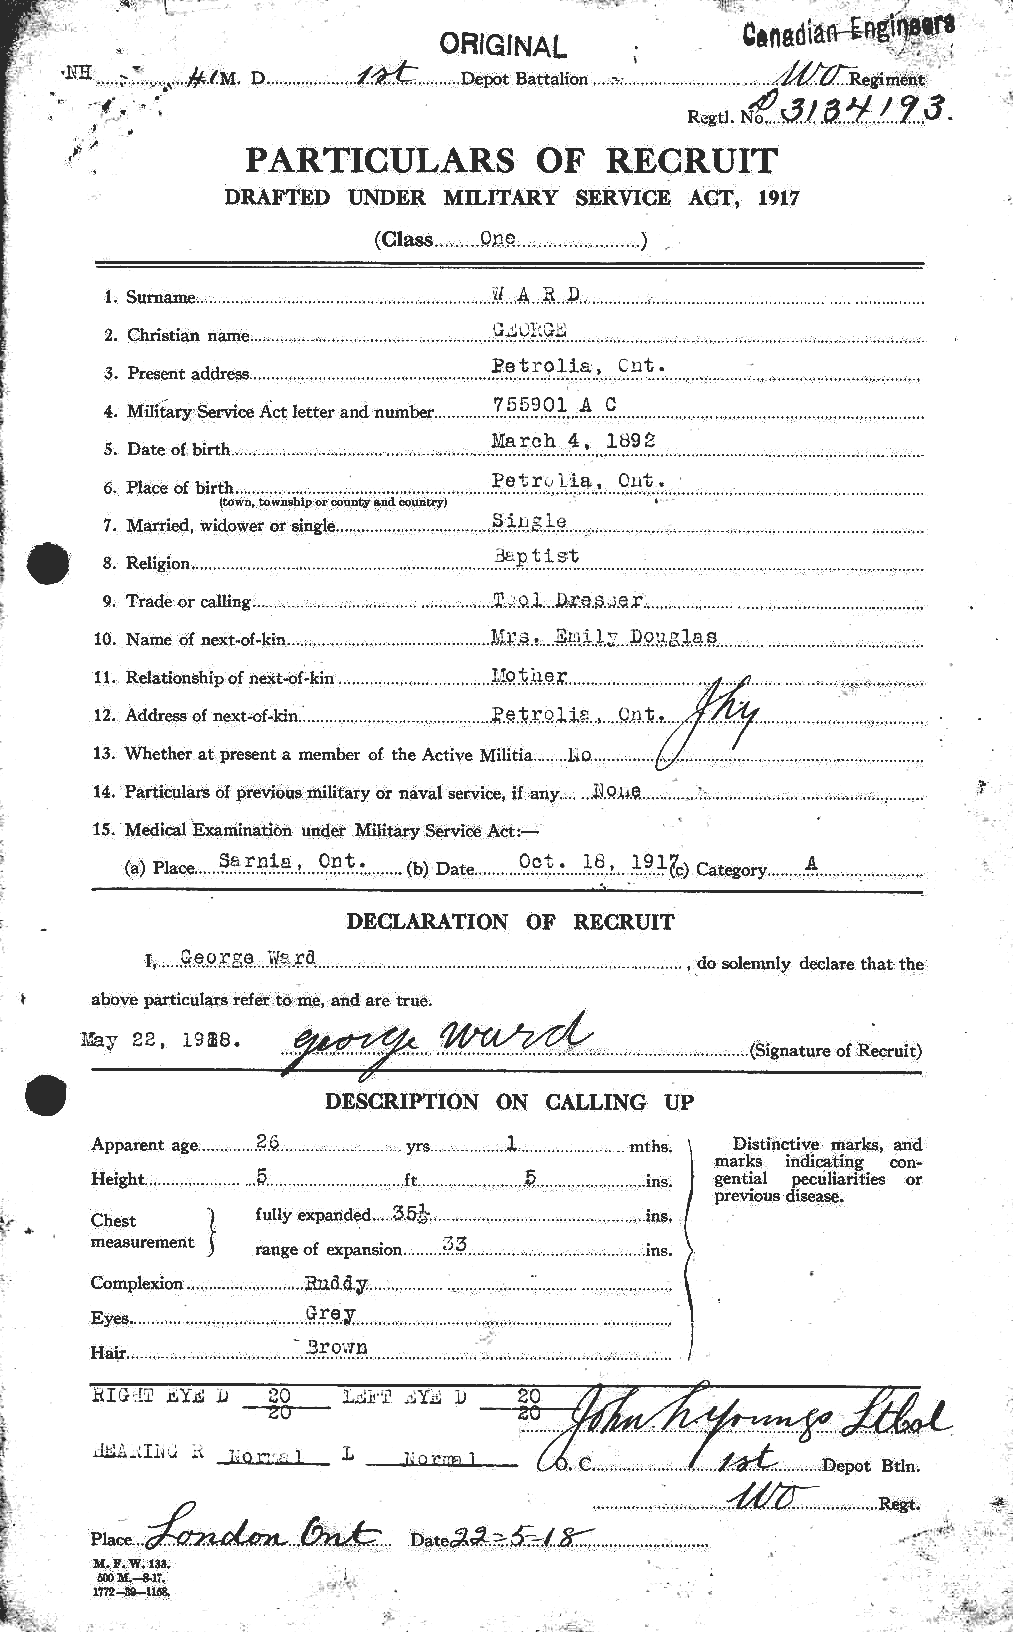 Personnel Records of the First World War - CEF 657736a